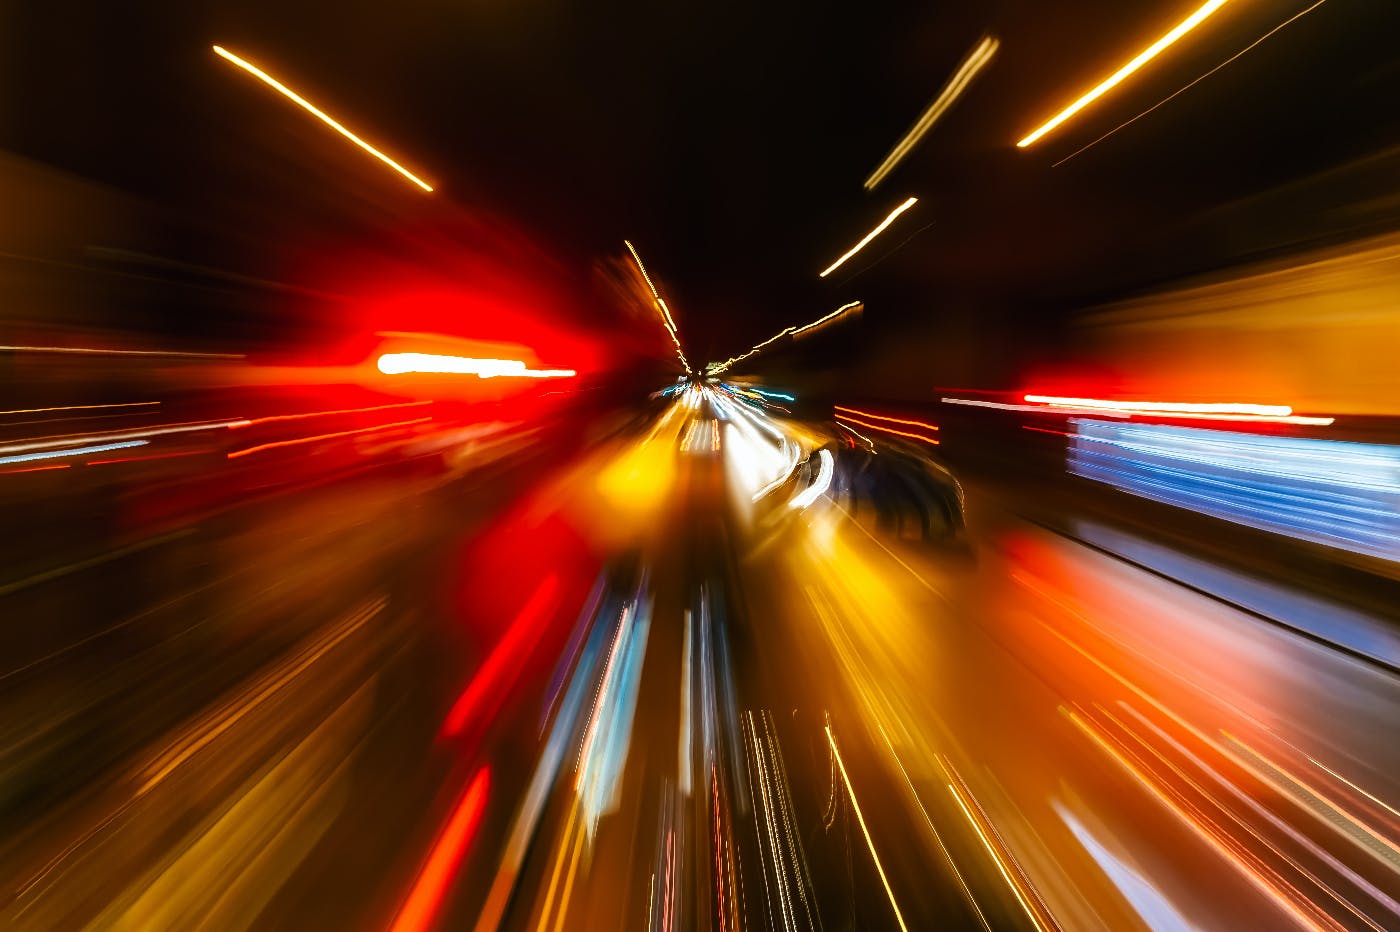 a long exposure of a city street making cars in motion look like streaks of colored lights